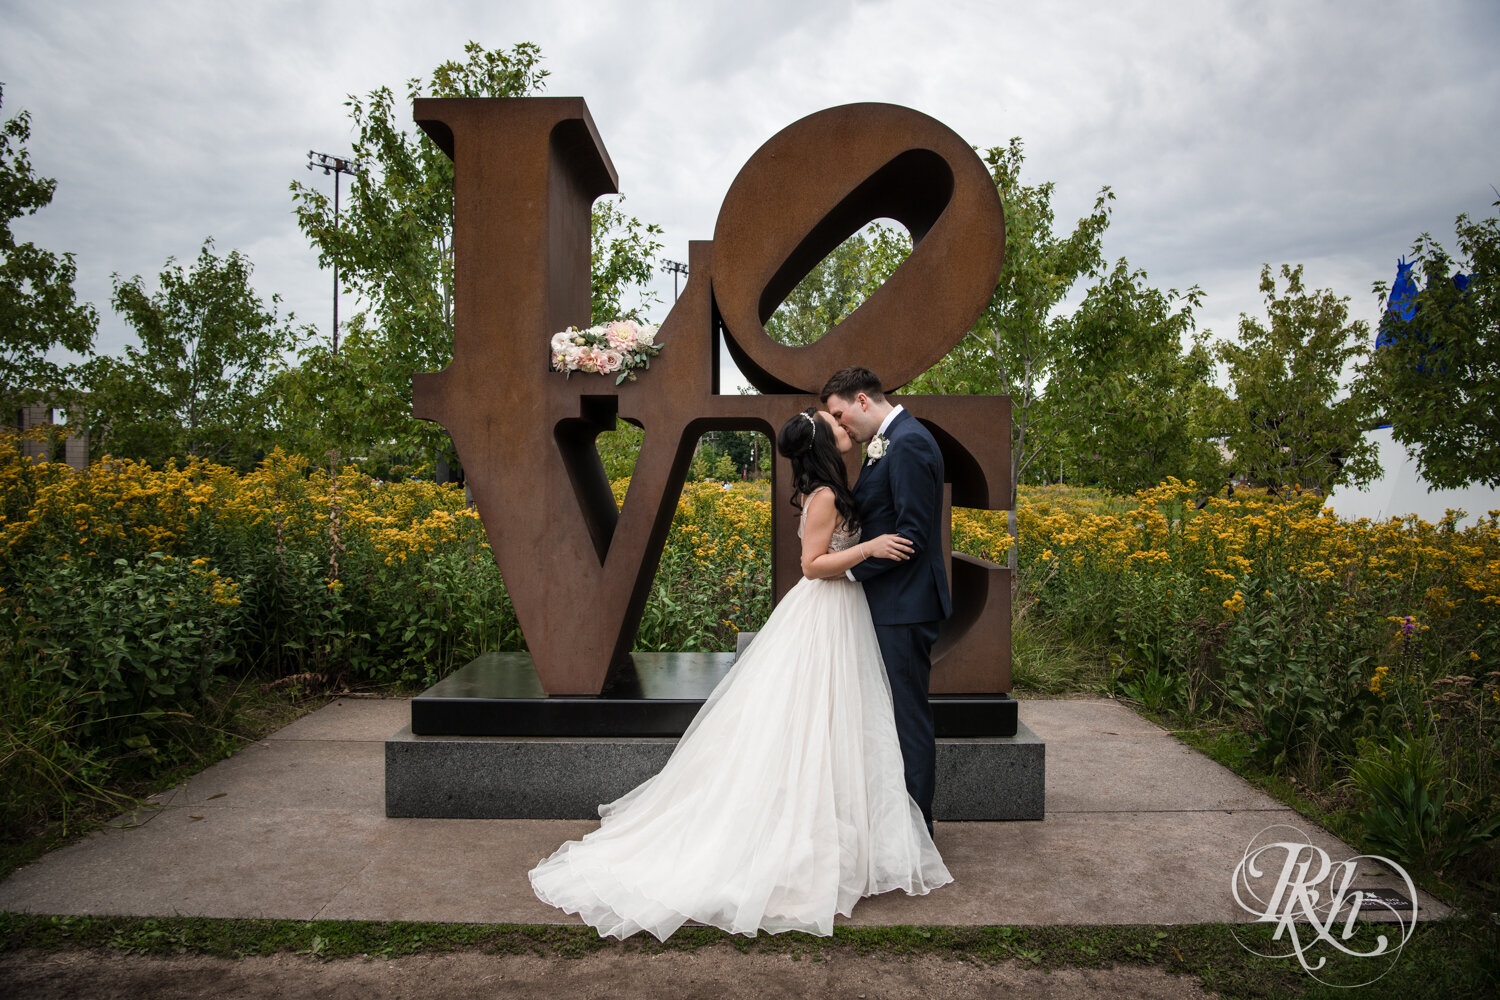 Asian bride and groom kiss in front of LOVE sign in Sculpture Garden in Minneapolis, Minnesota.